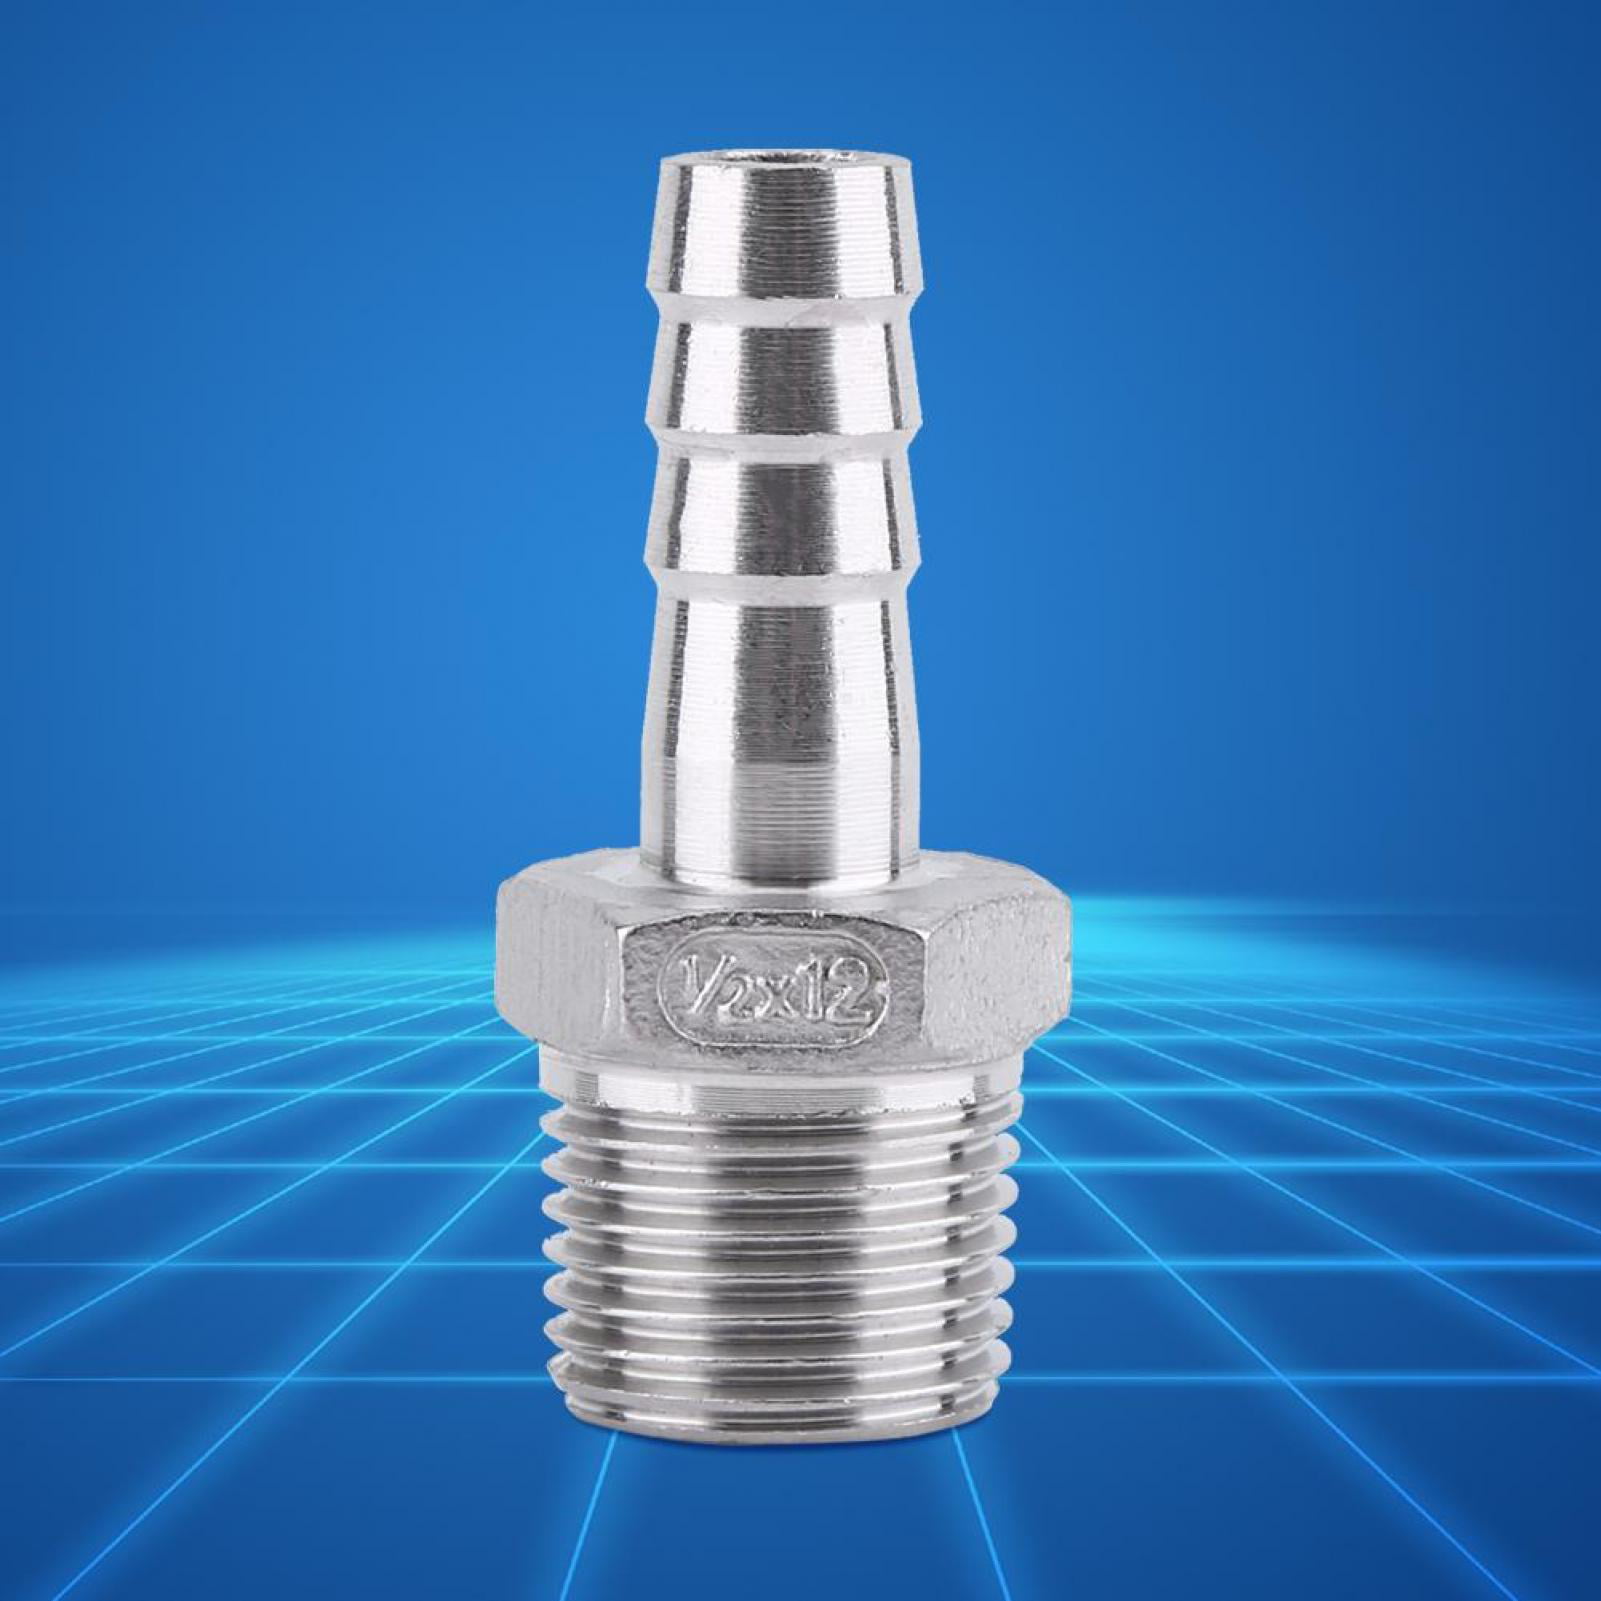 1/4" Male Thread Pipe Fitting x10mm Barb Hose Tail Connector Stainless Steel NPT 